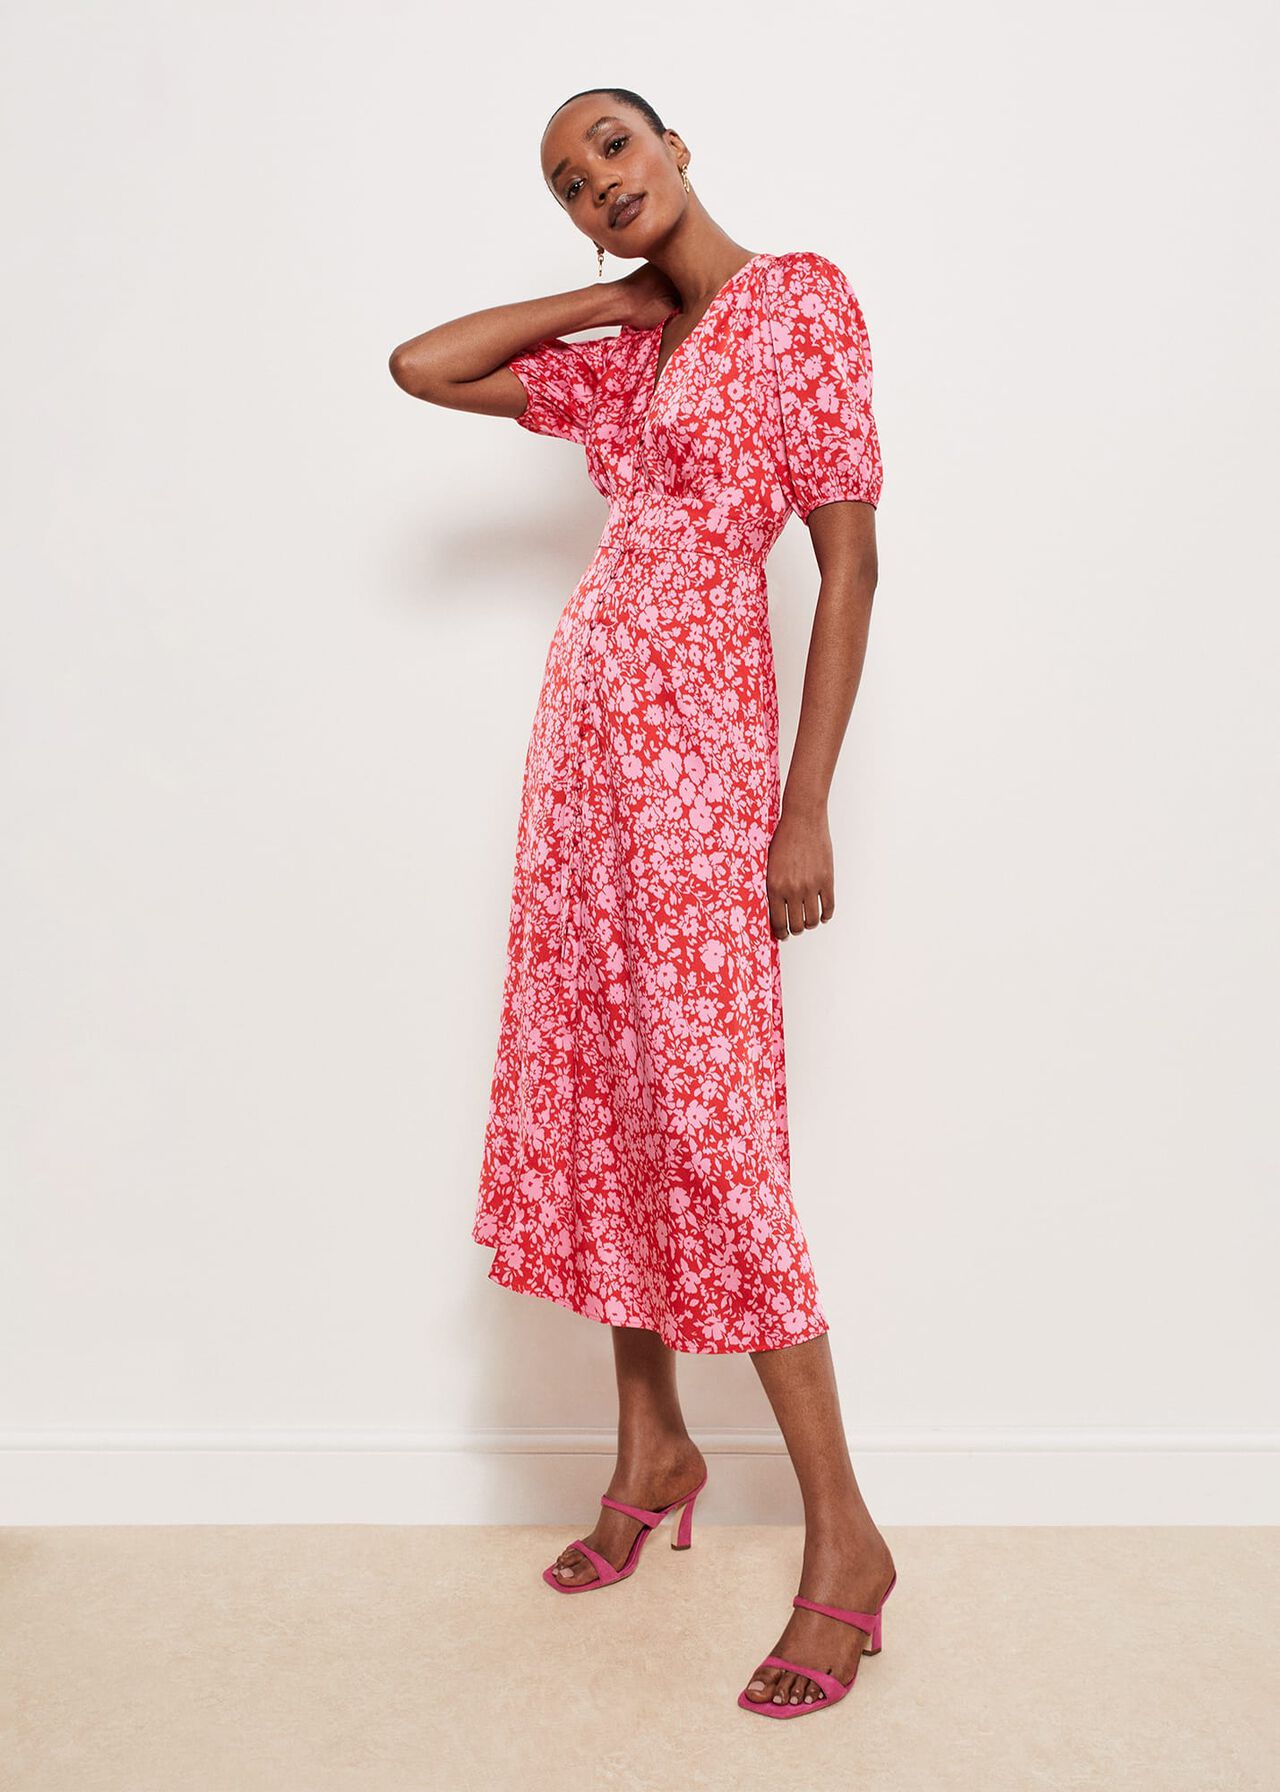 Greywell Dress, Red Rose Pink, hi-res